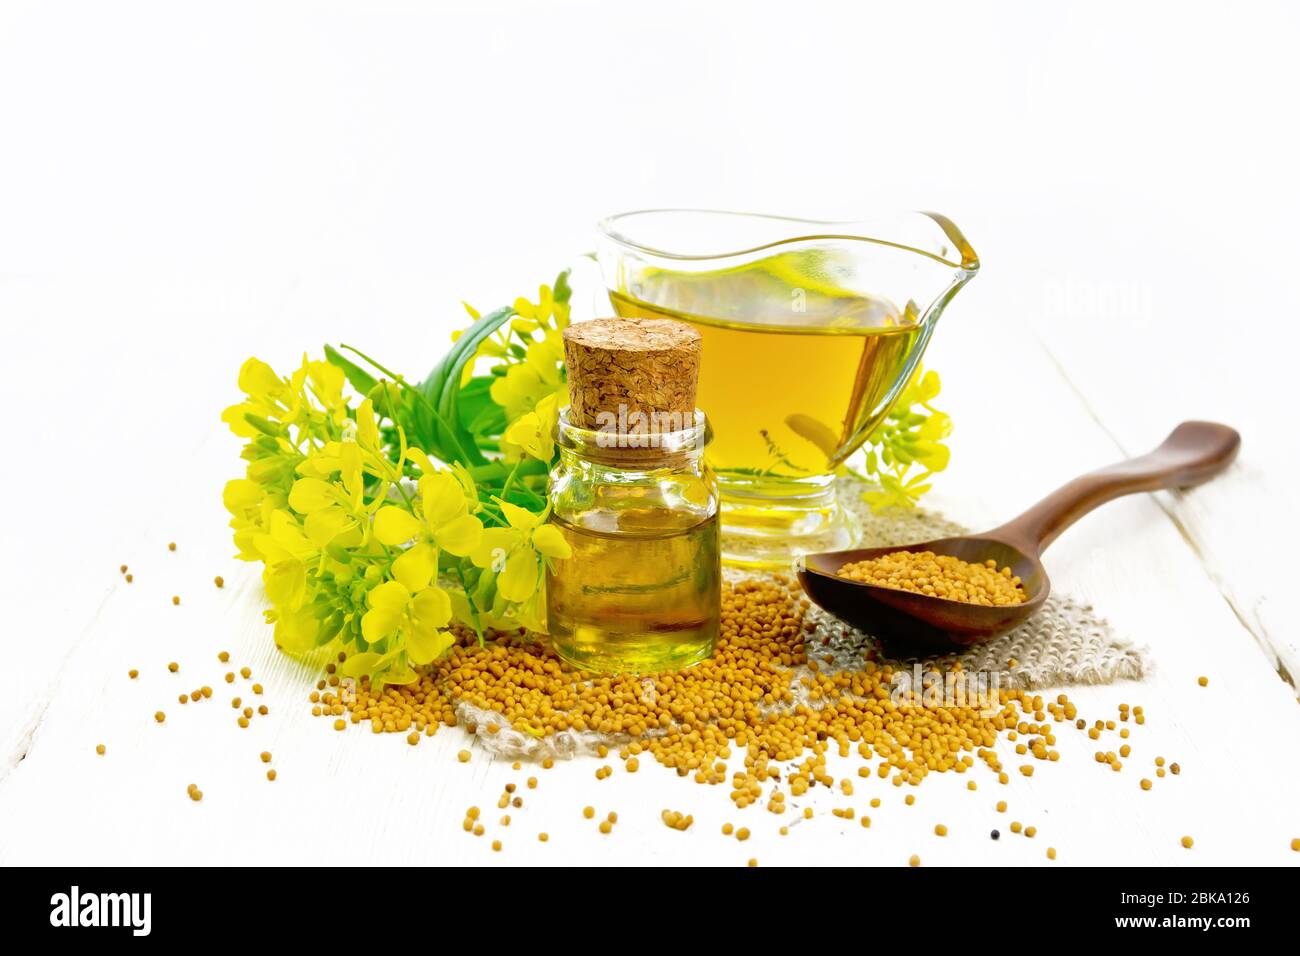 Mustard oil in a glass bottle and gravy boat, grains in a spoon and on a  burlap napkin, yellow mustard flowers on wooden board background Stock  Photo - Alamy